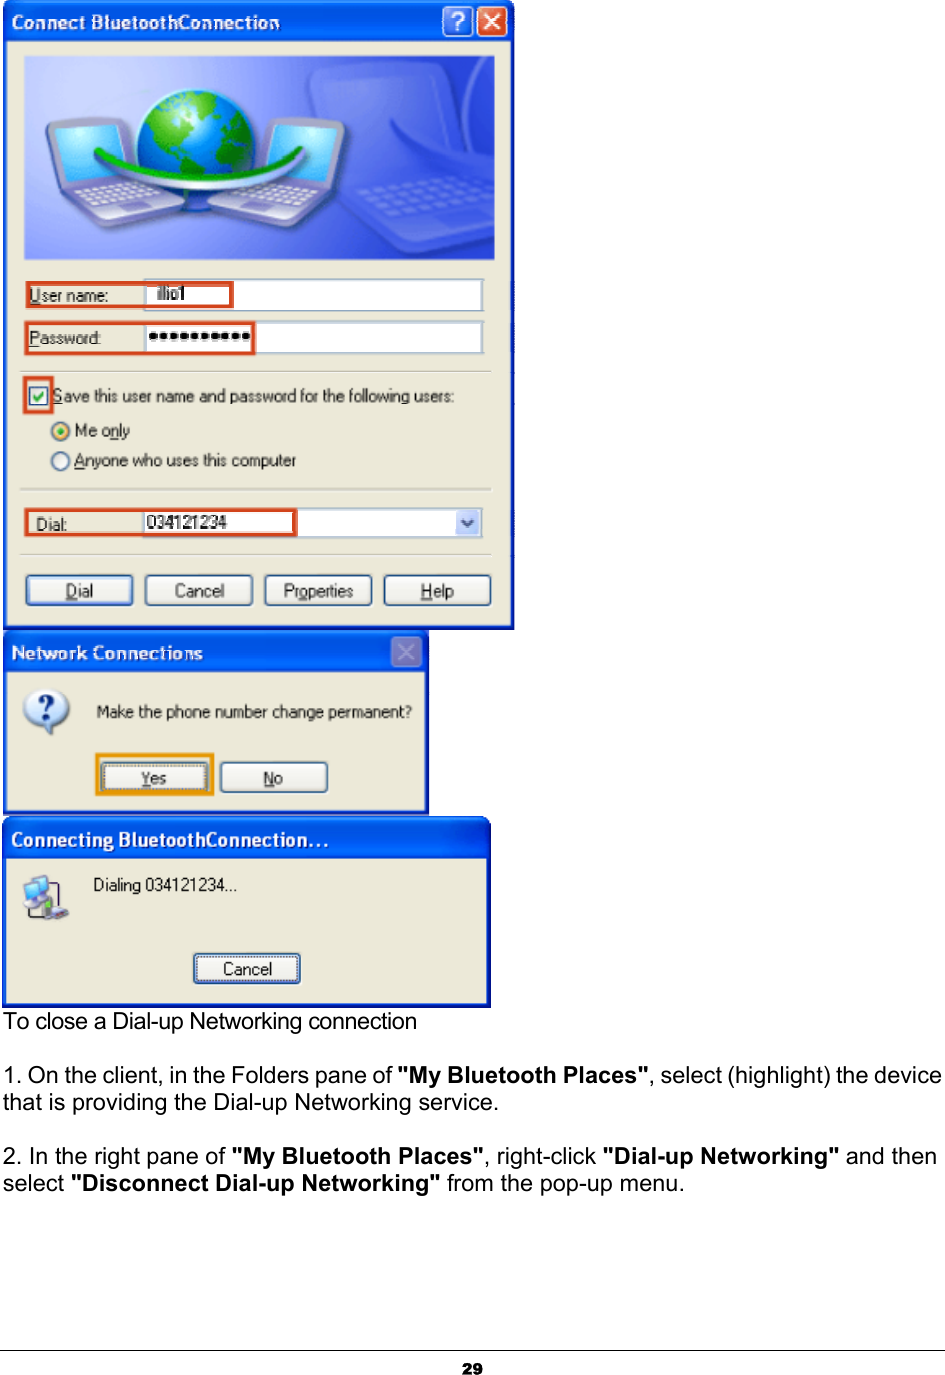   29   To close a Dial-up Networking connection  1. On the client, in the Folders pane of &quot;My Bluetooth Places&quot;, select (highlight) the device that is providing the Dial-up Networking service.  2. In the right pane of &quot;My Bluetooth Places&quot;, right-click &quot;Dial-up Networking&quot; and then select &quot;Disconnect Dial-up Networking&quot; from the pop-up menu. 